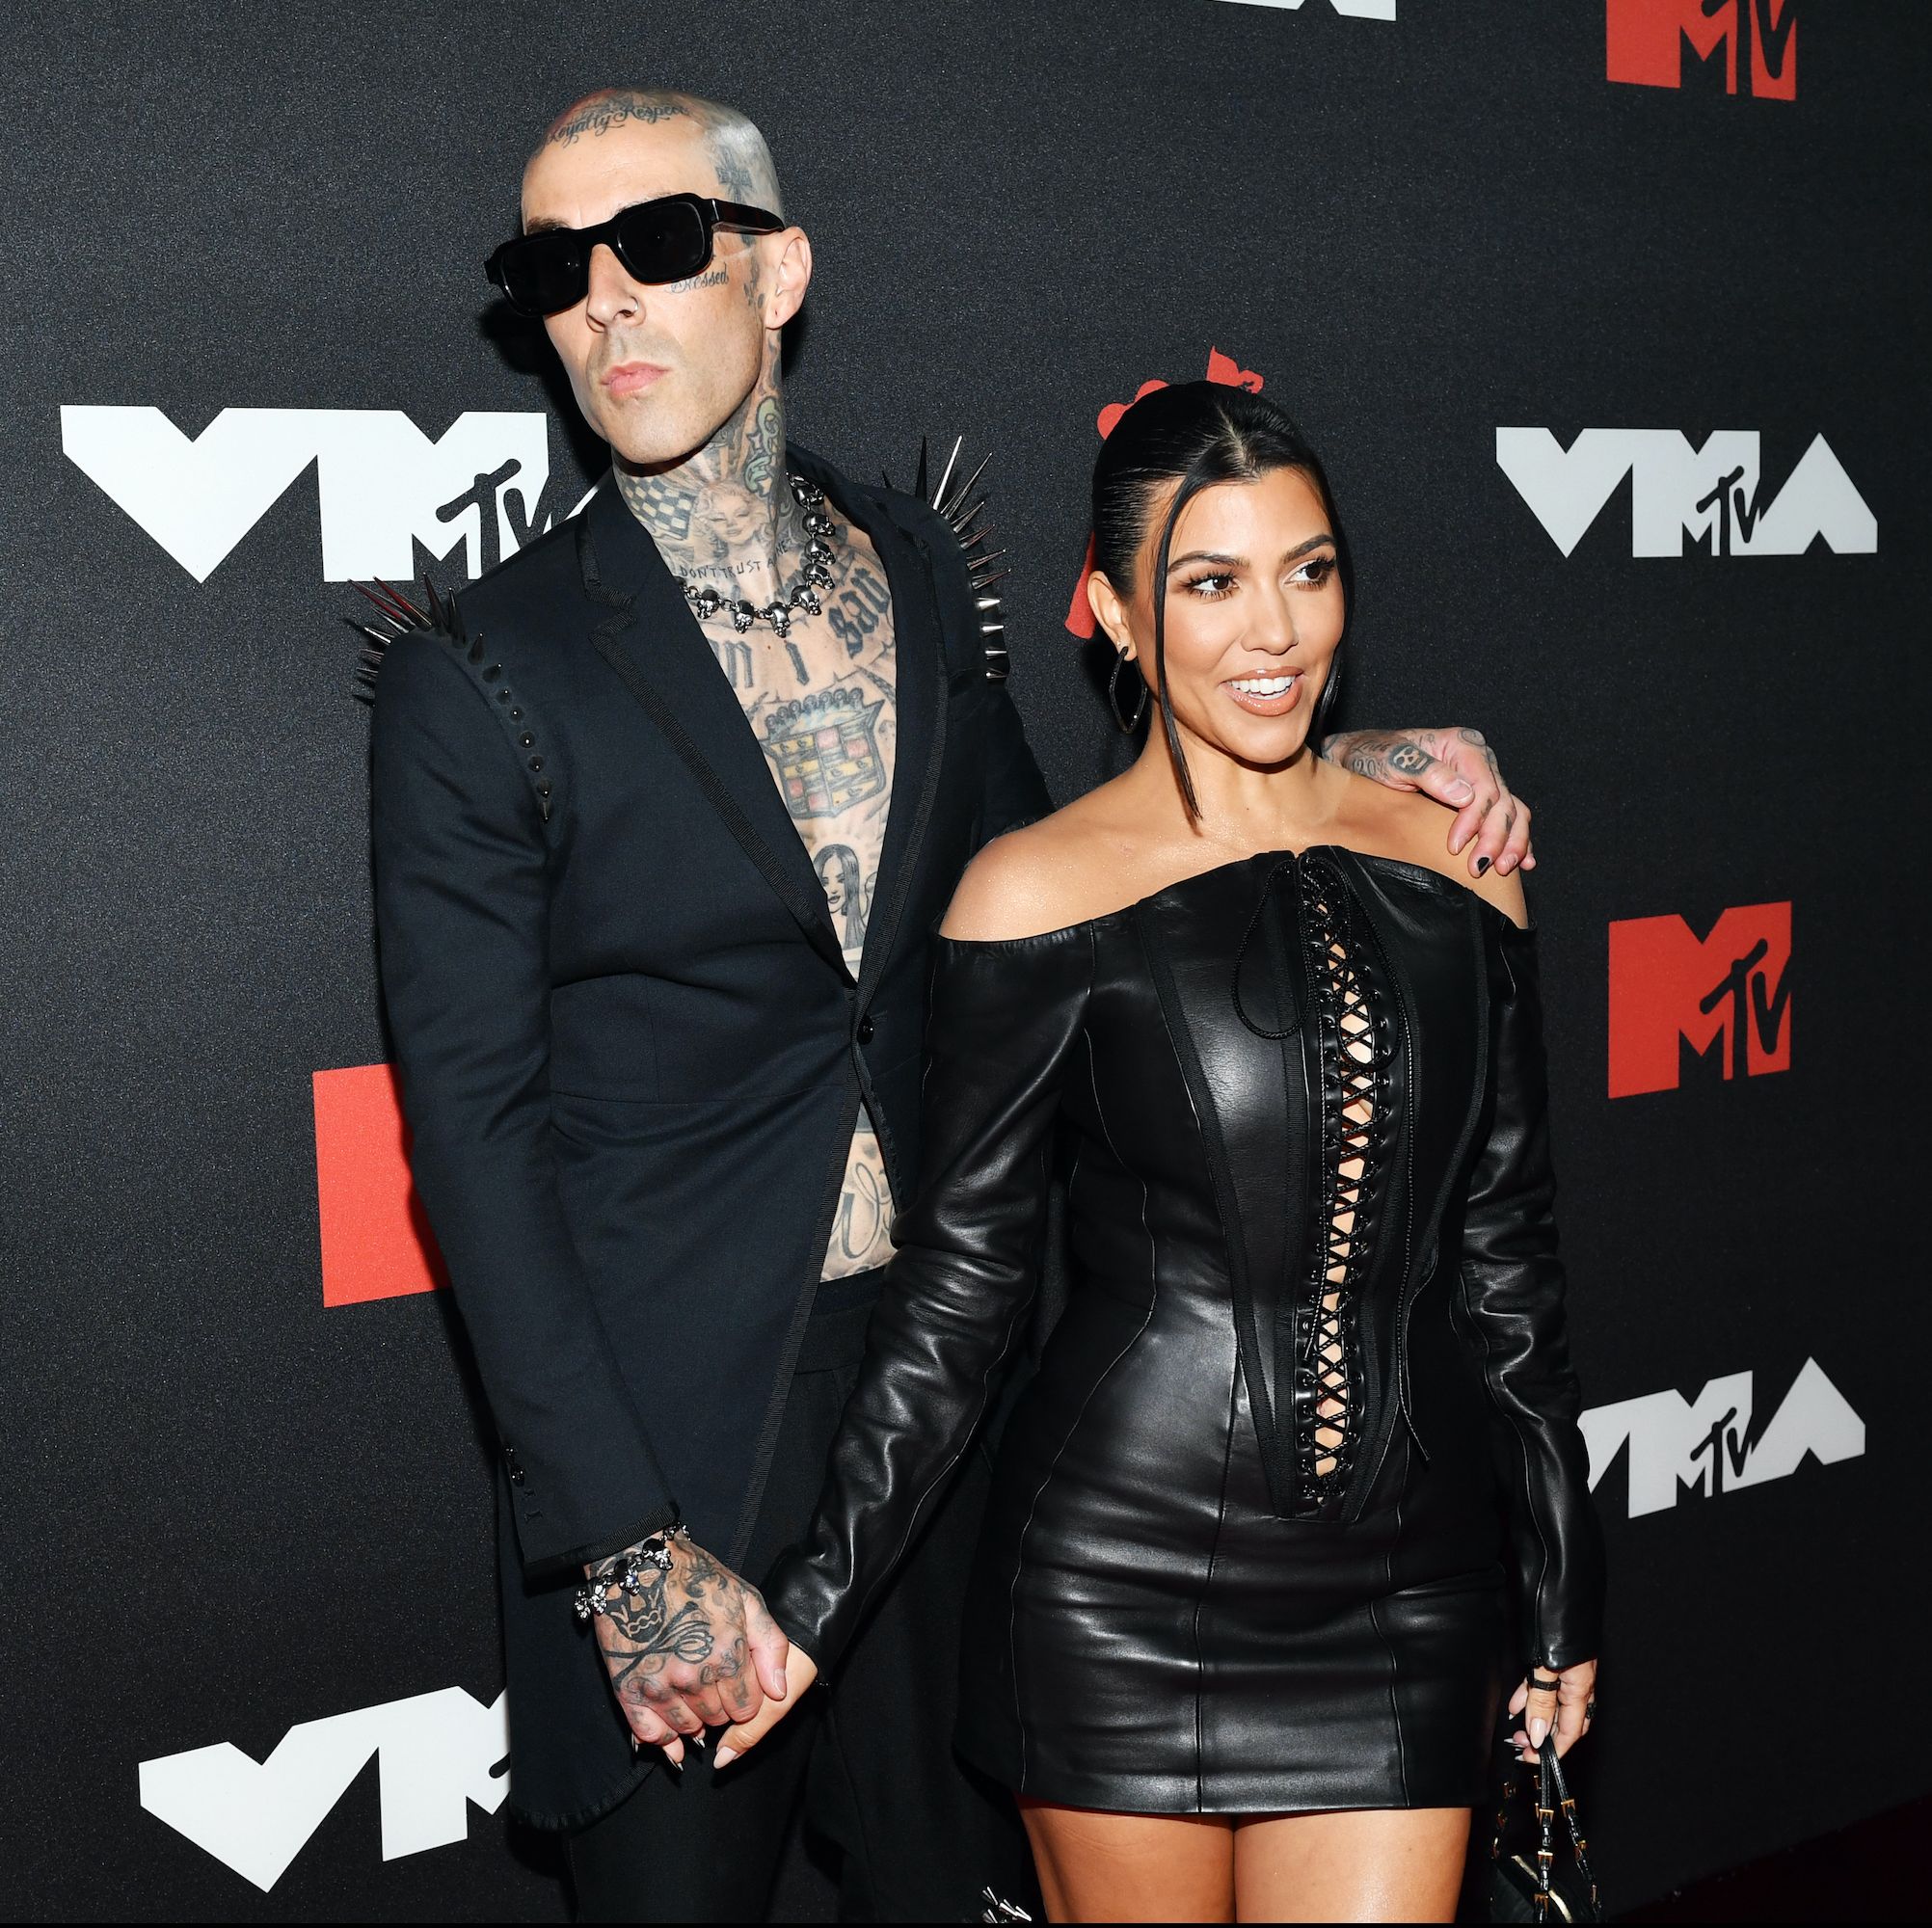 Everything We Know About Kourtney Kardashian and Travis Barker's Relationship